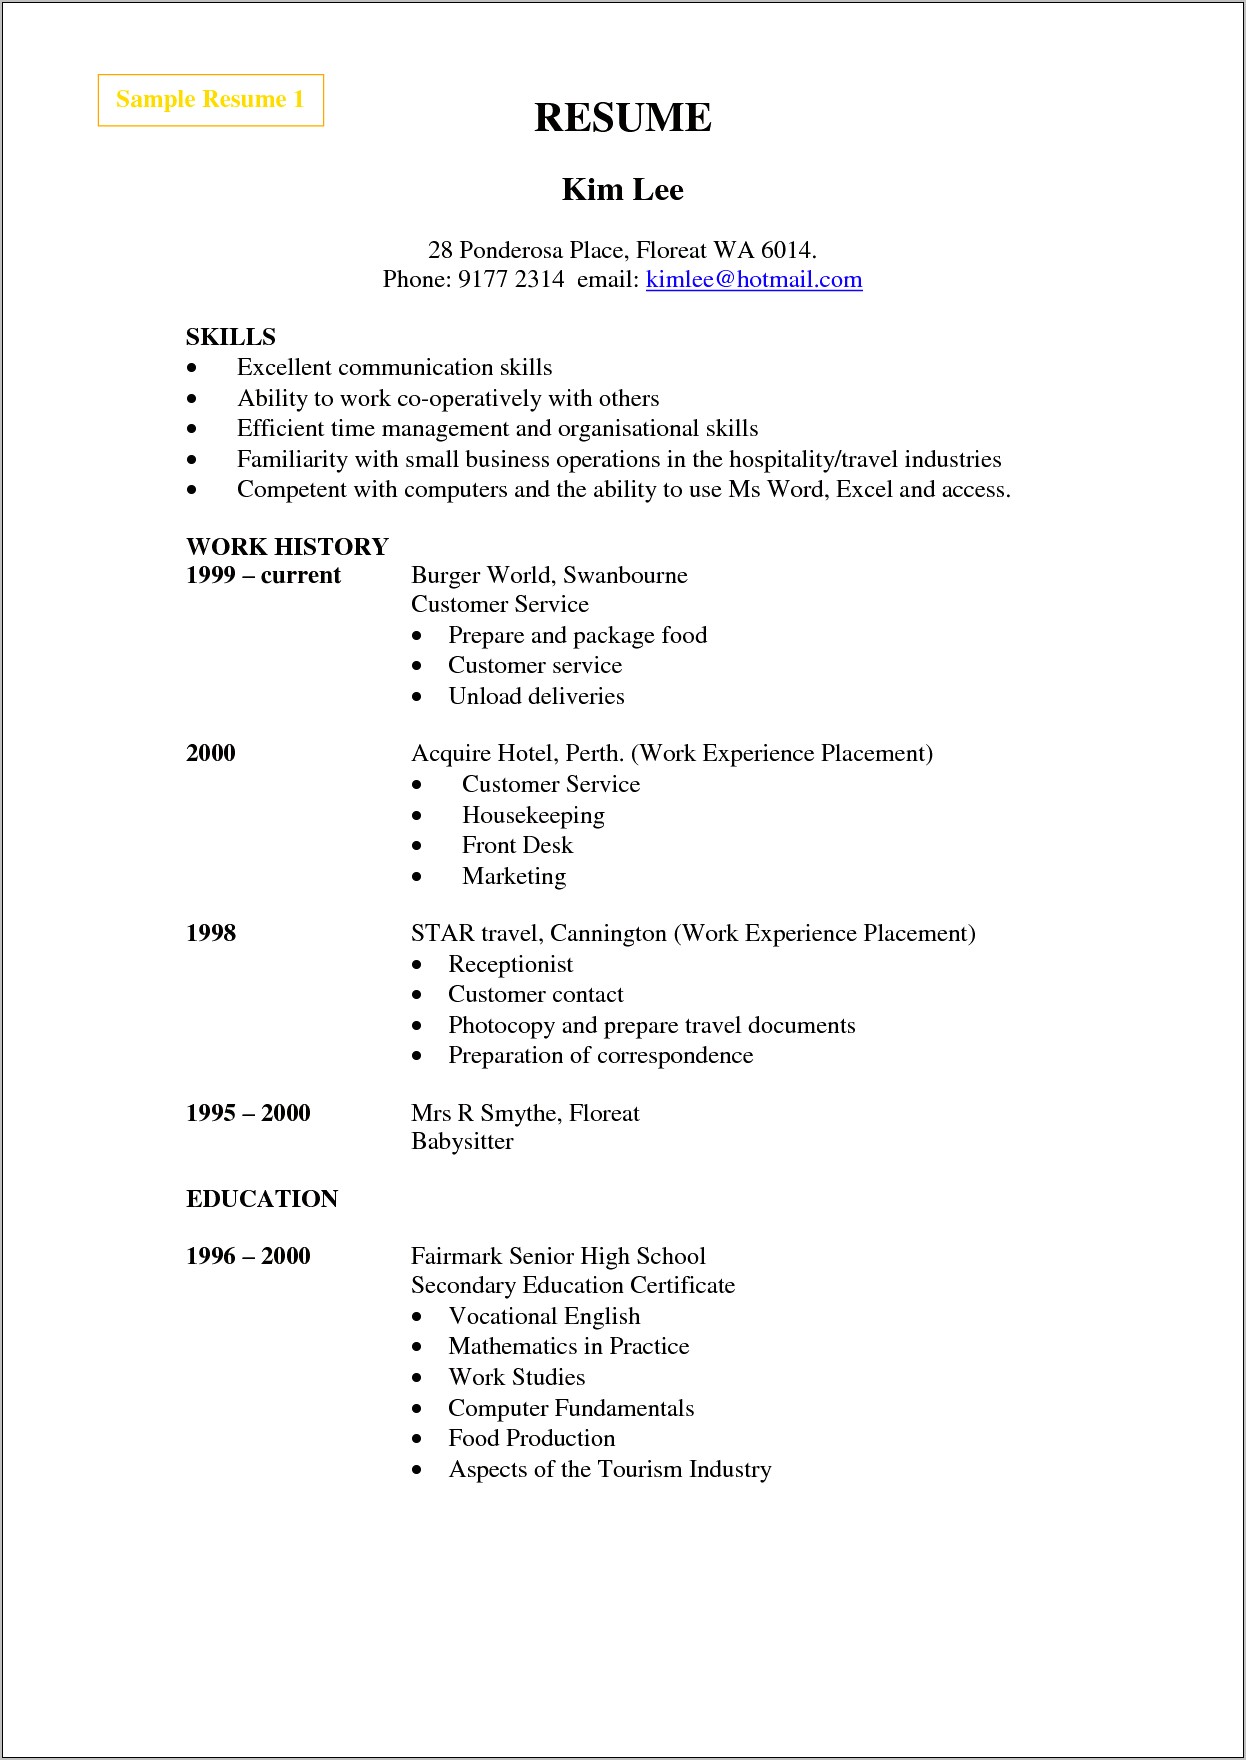 Resume For Cleaning Job With No Experience